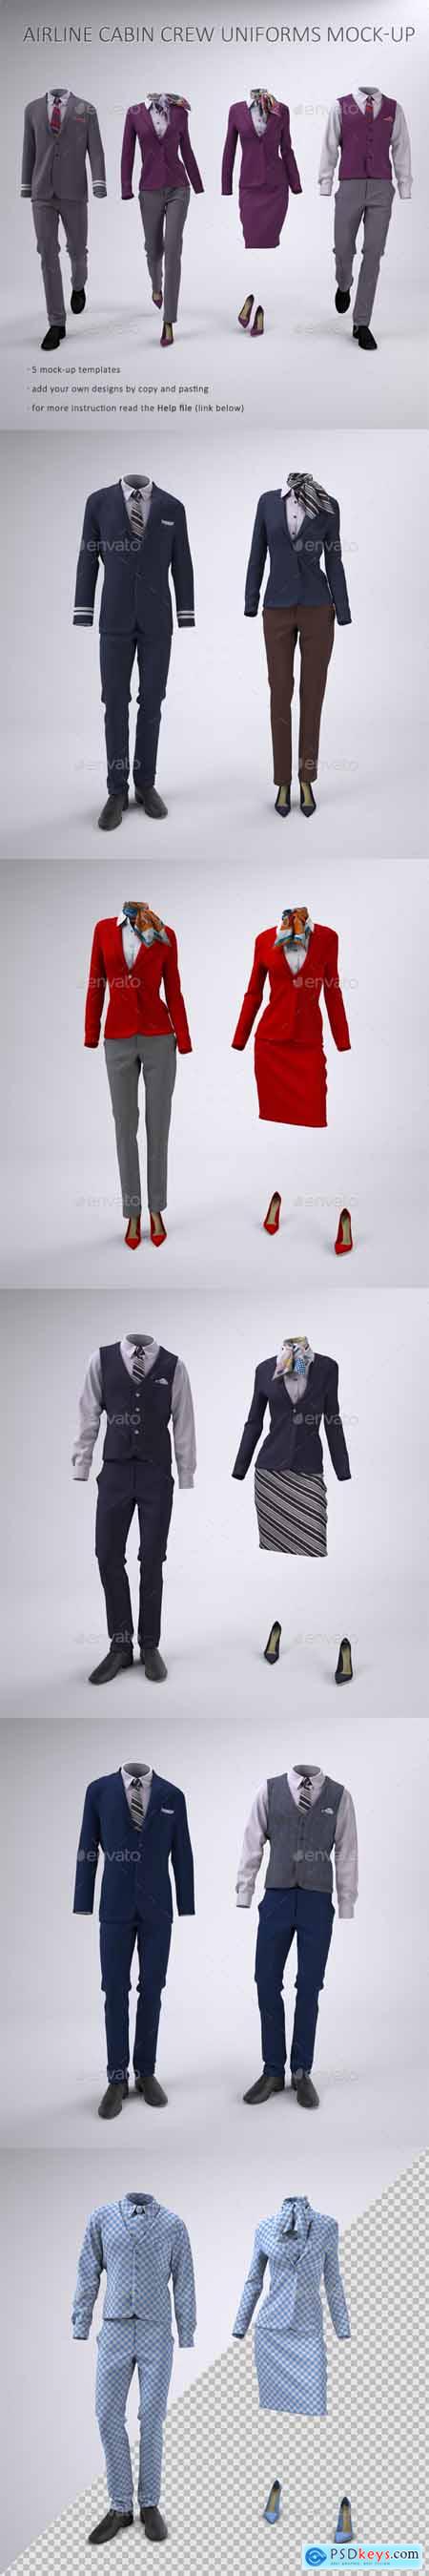 Airline Cabin Crew or Hotel Uniforms Mock-Up 23268316